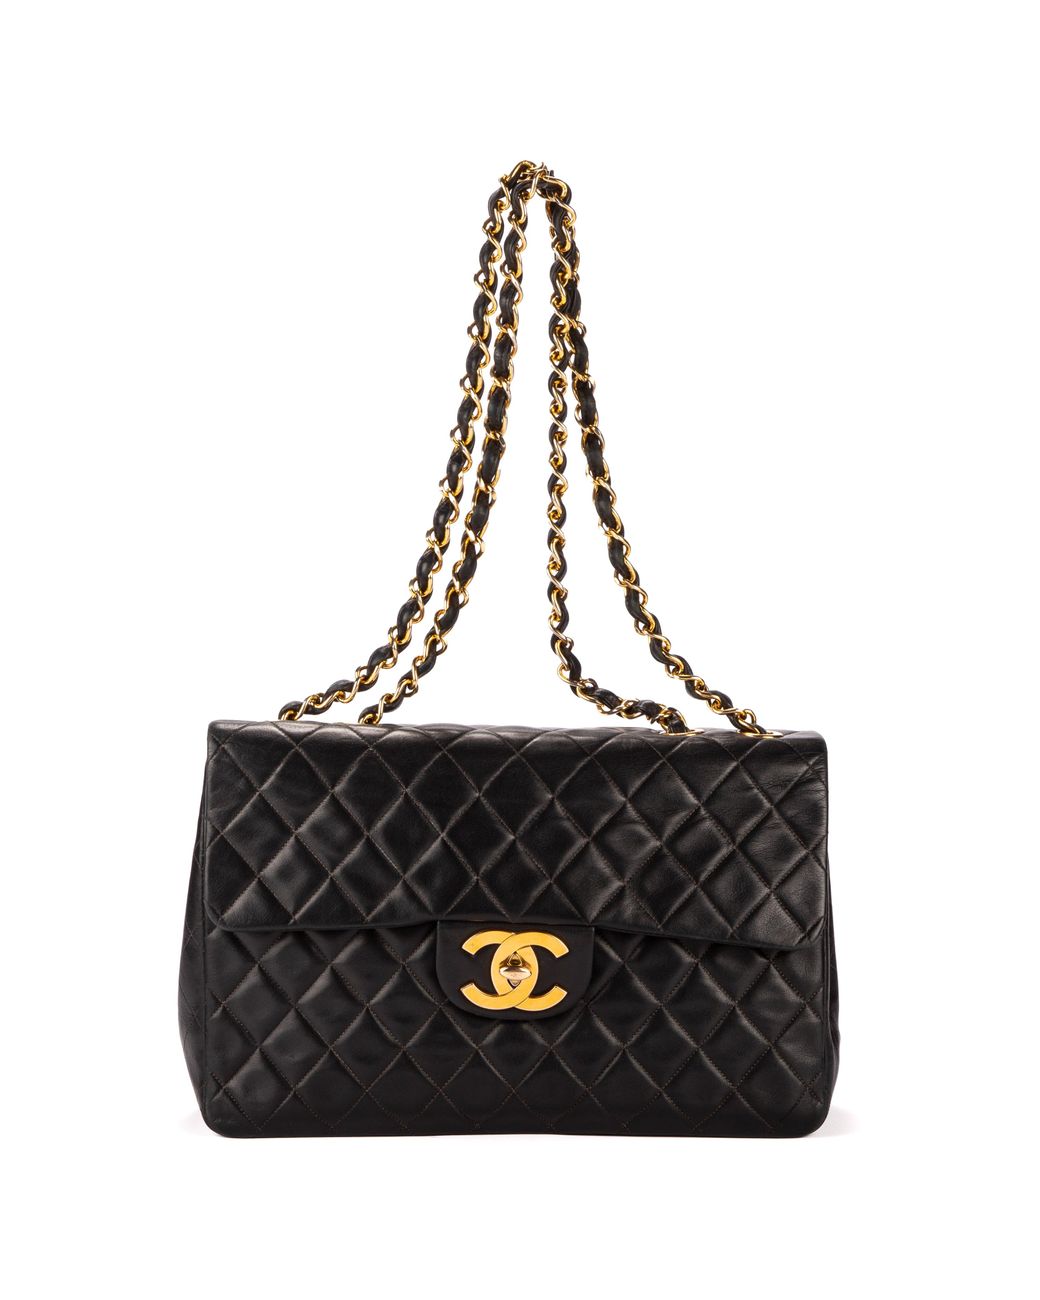 Chanel's Classic Flap Bag Increased In Value Over 70% in Past 6 Years -  Racked